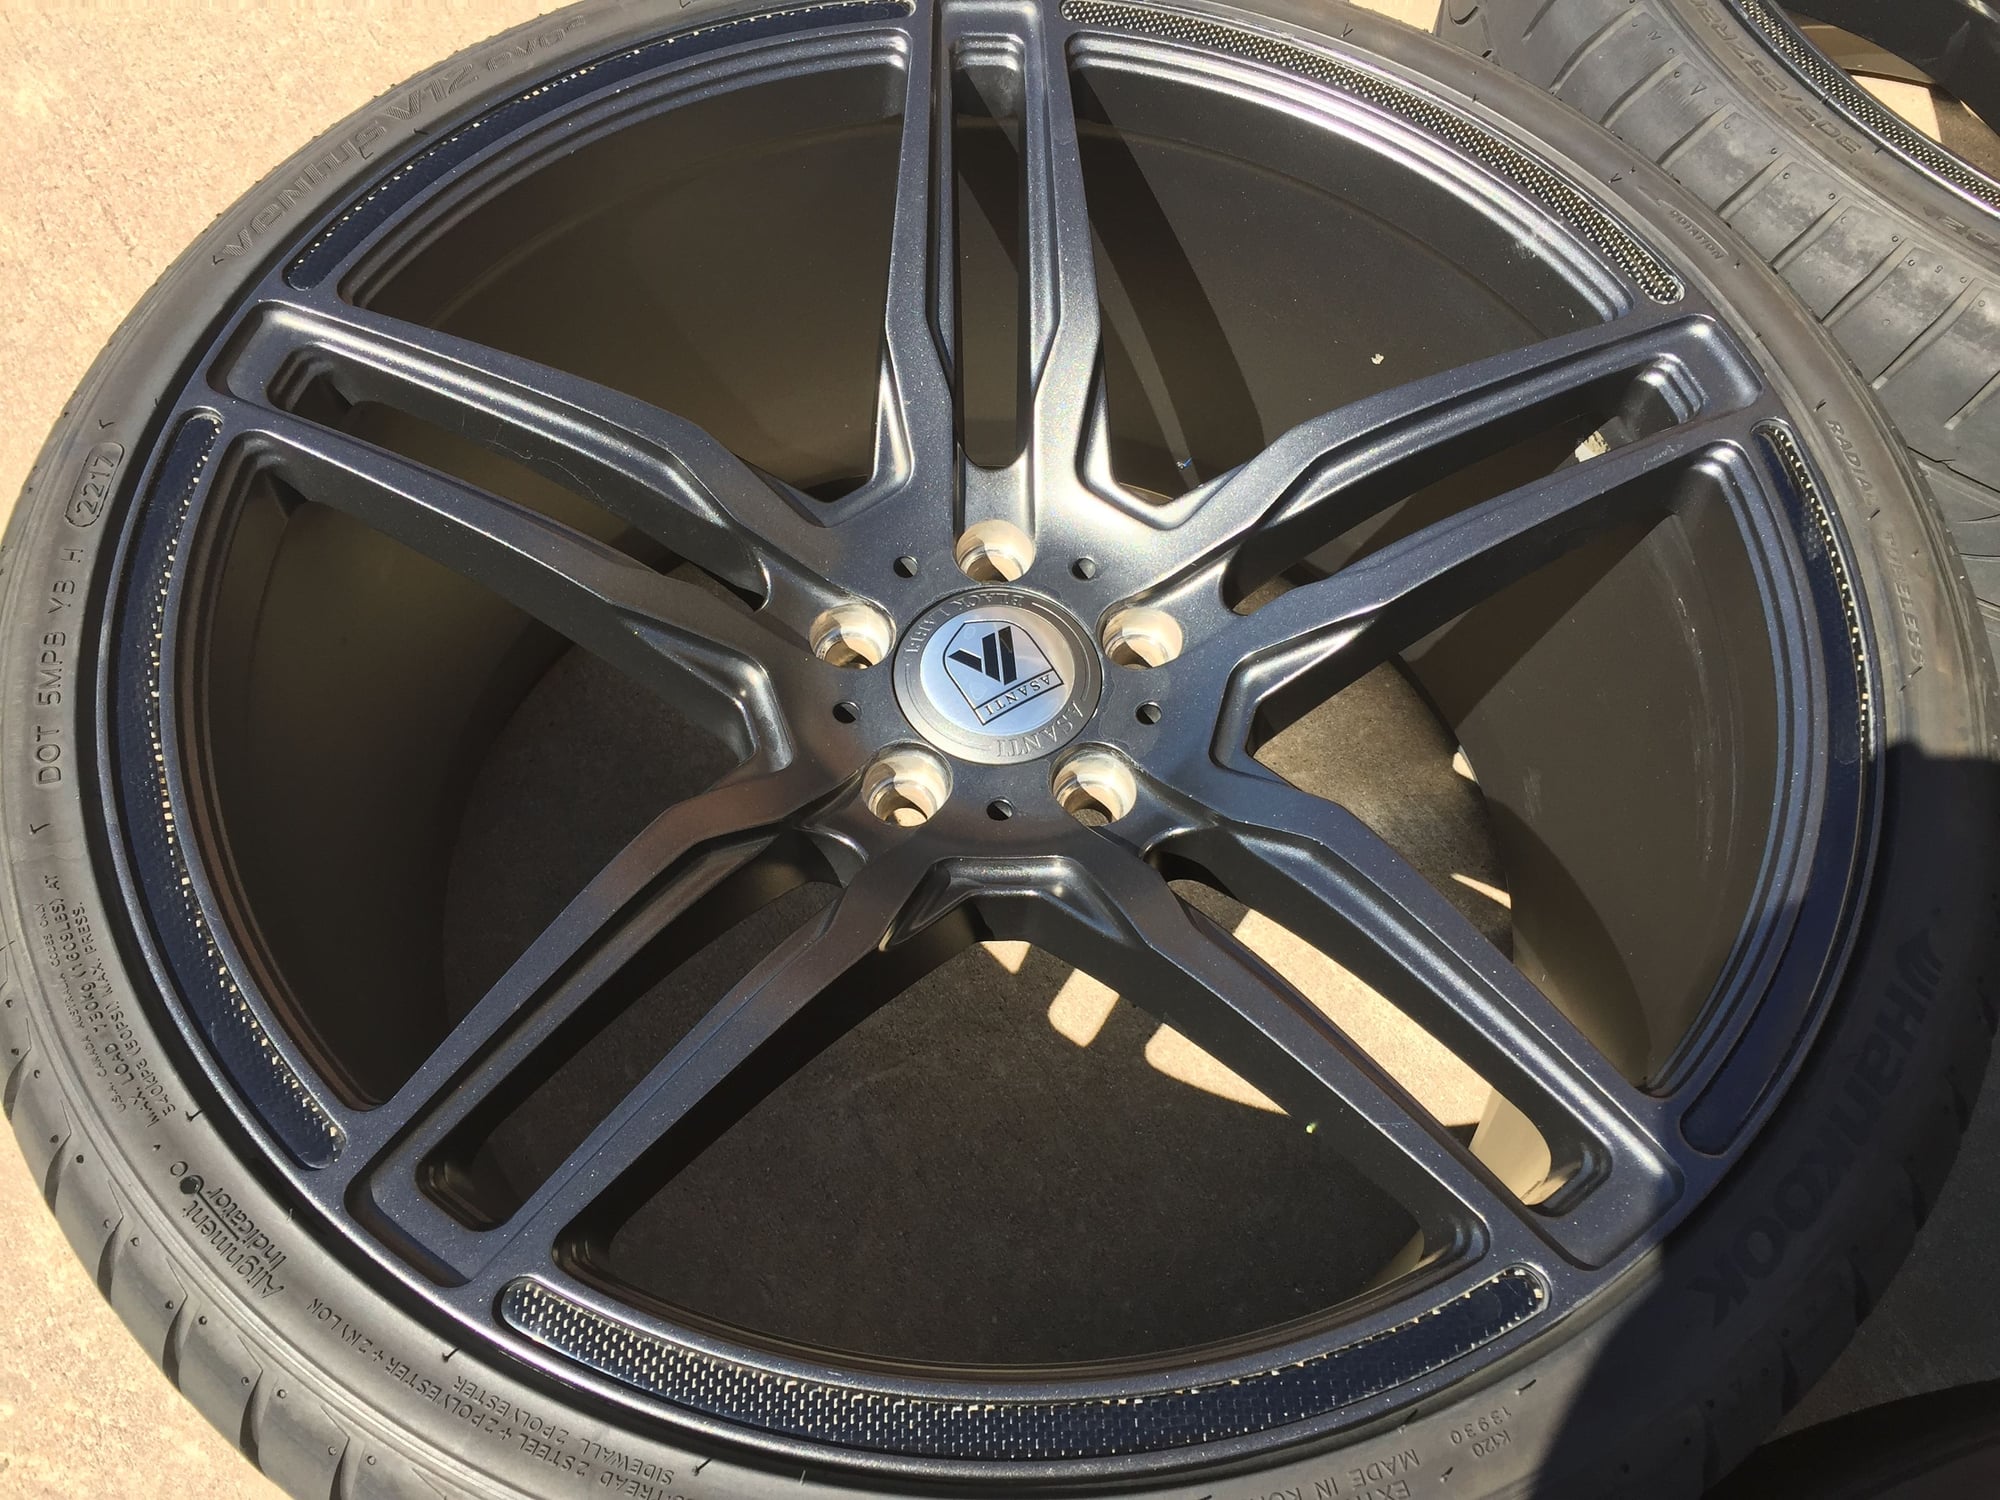 Wheels and Tires/Axles - Set of 20" Asanti ABL12s in Sapphire Matte Carbon - Used - Forney, TX 75126, United States